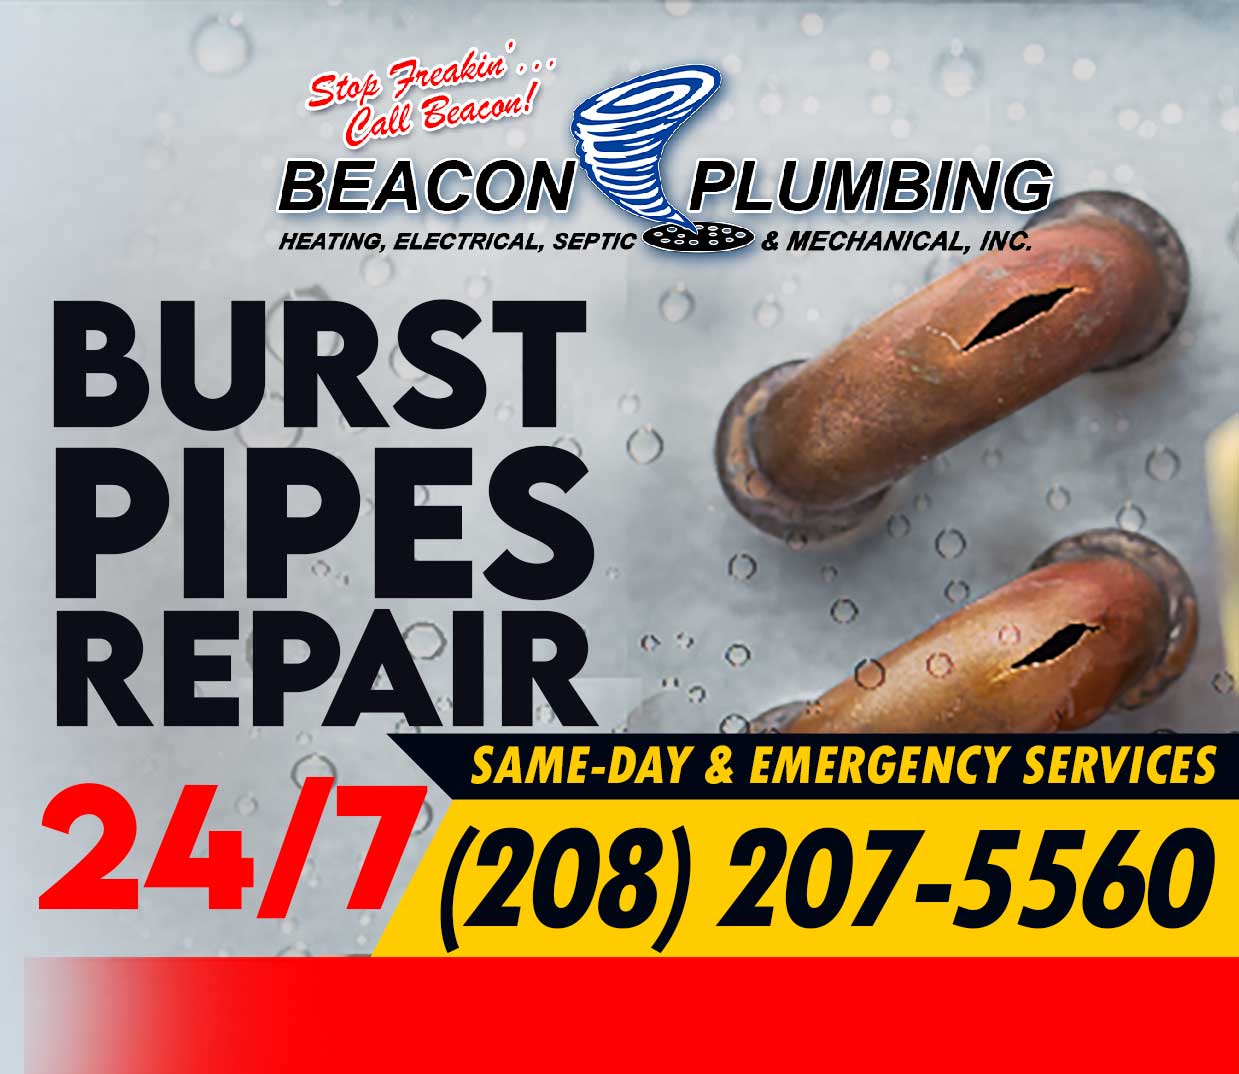 Emergency Carnation rusted pipe replacement in WA near 98014